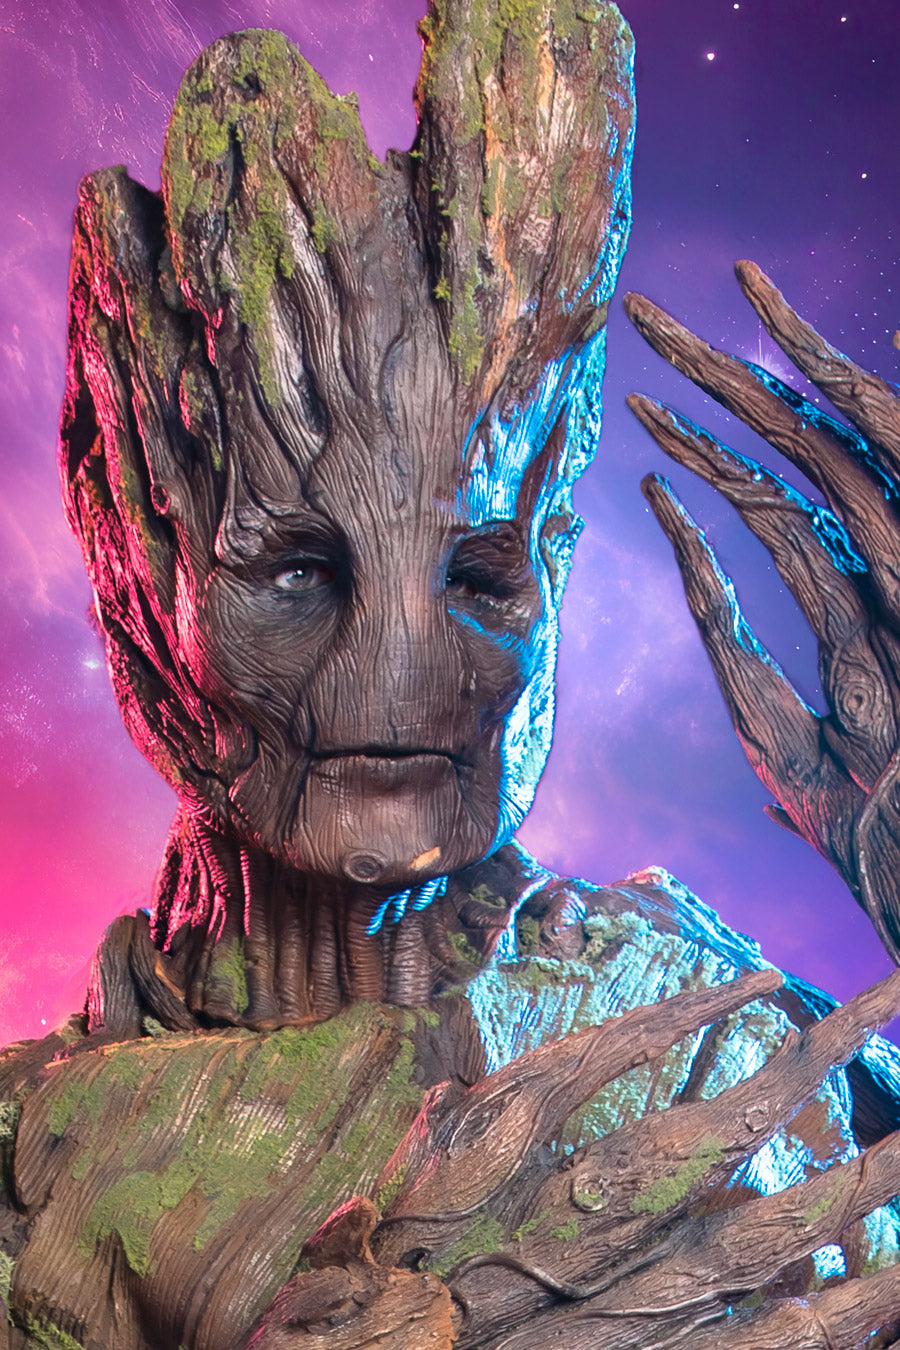 Guardians of the Galaxy Groot Costume Hire or Cosplay. Proudly by and available at, Little Shop of Horrors Costumery 6/1 Watt Rd Mornington & Melbourne